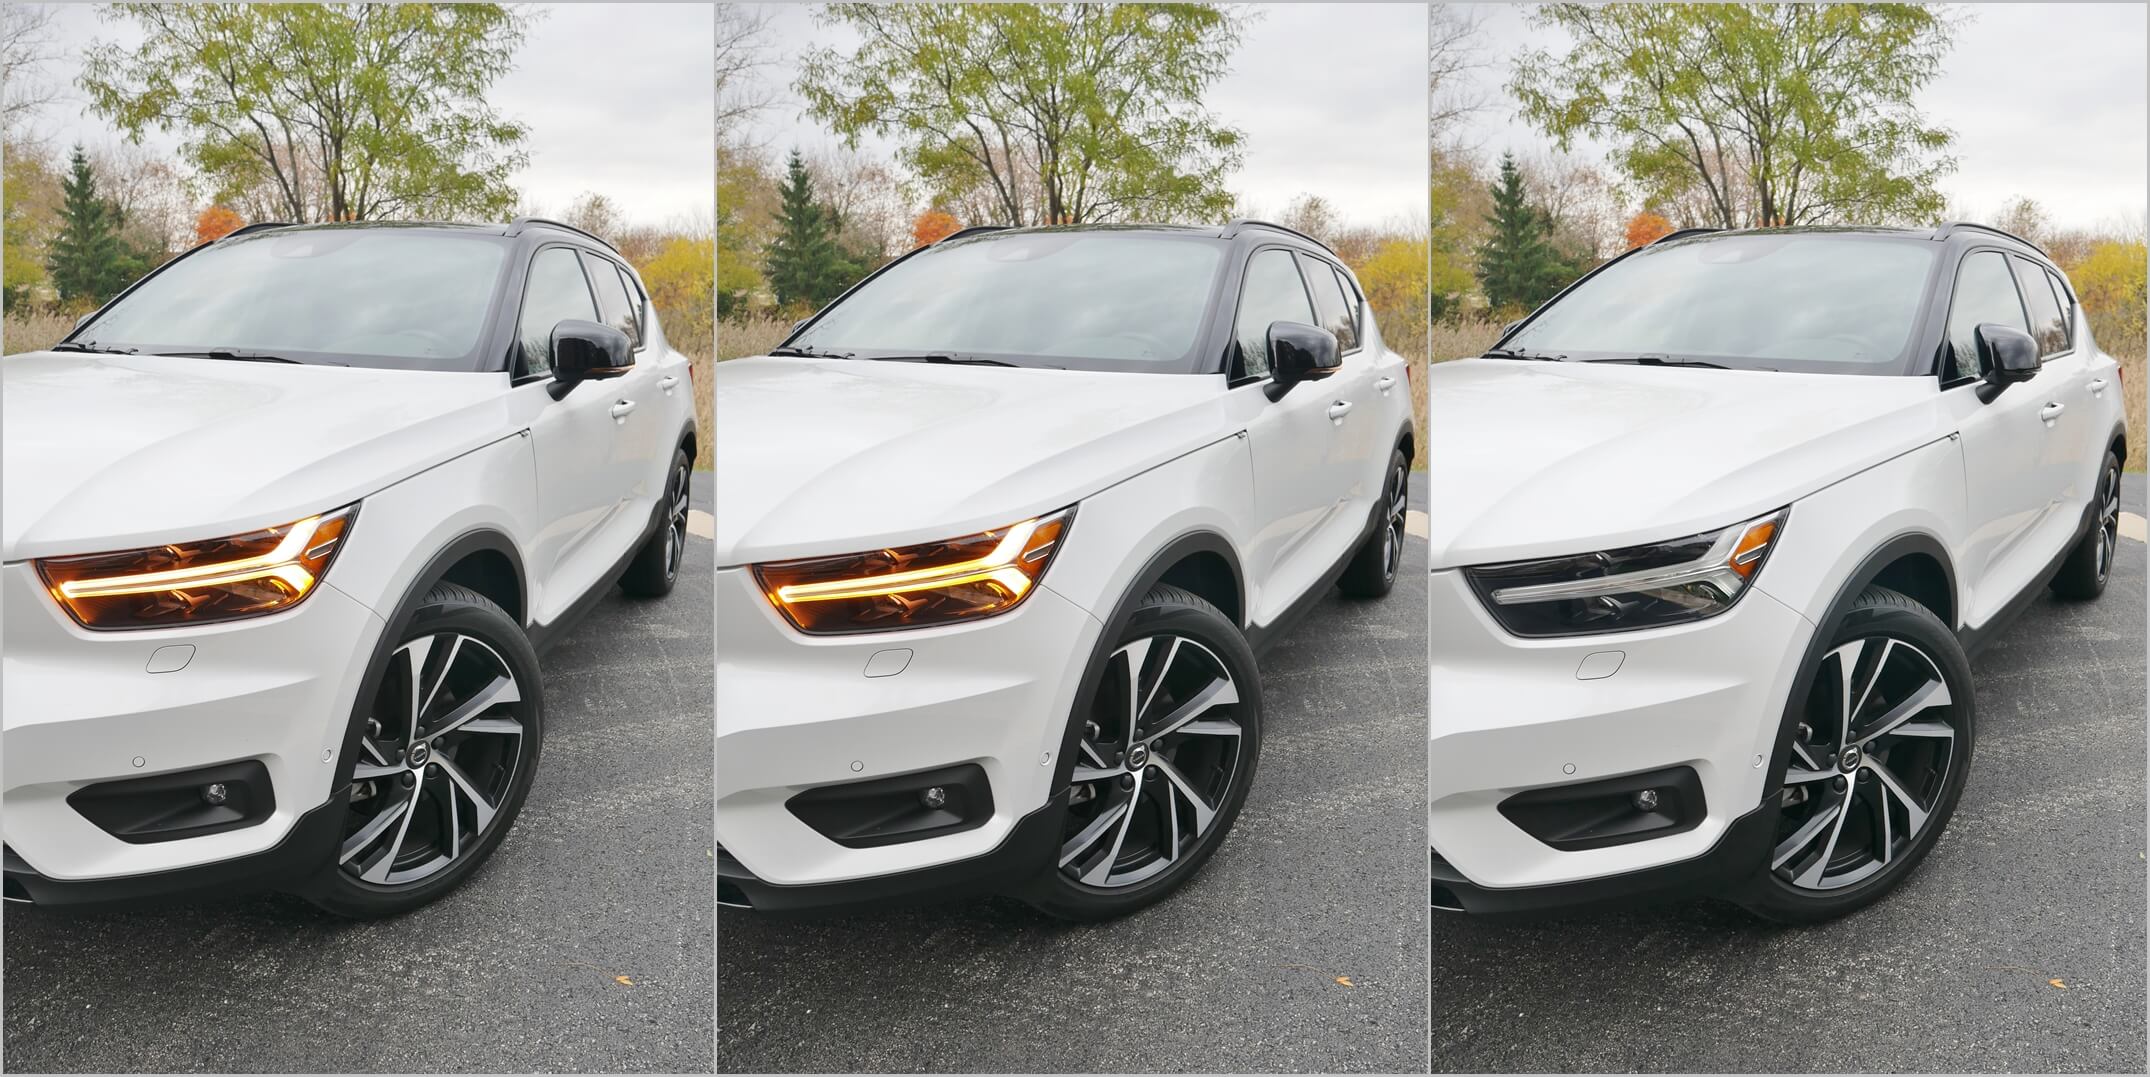 2019 Volvo XC40 T5 R-Design: LED "Thor's Hammer" alternates from white DRL to amber directionals as wing mirrors fold upon comfort access lock / unlock